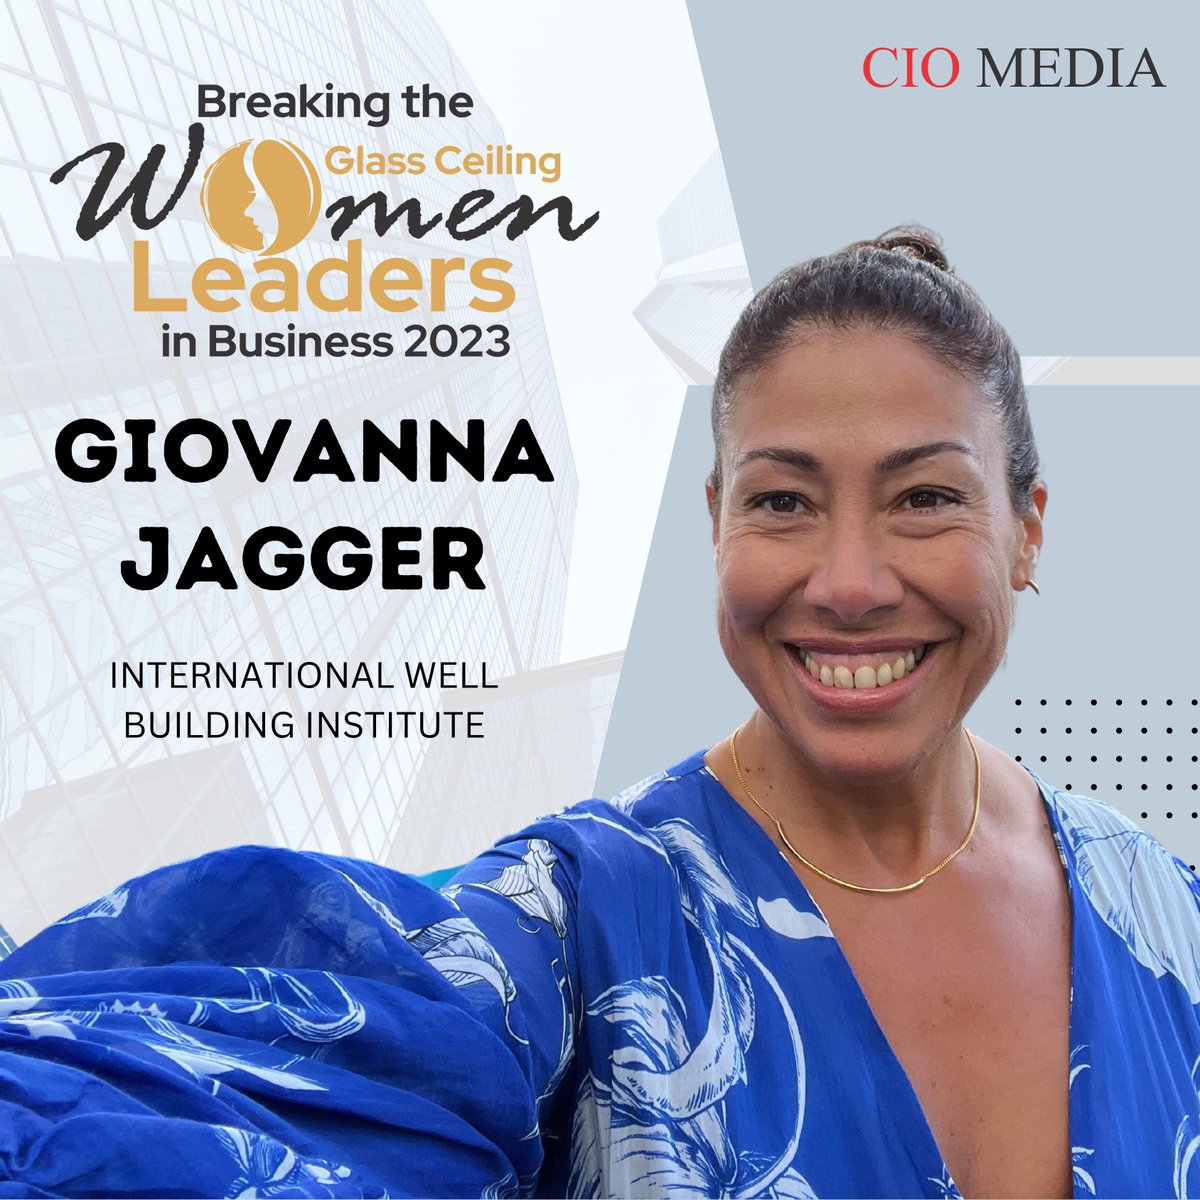 @GiovannaJagger: A Trailblazer in Business Development and Sustainability A leader in business development and sustainability, exemplifies the power of passion and leadership. Her commitment to making a positive impact and championing diversity sets her apart. #CIOMedia